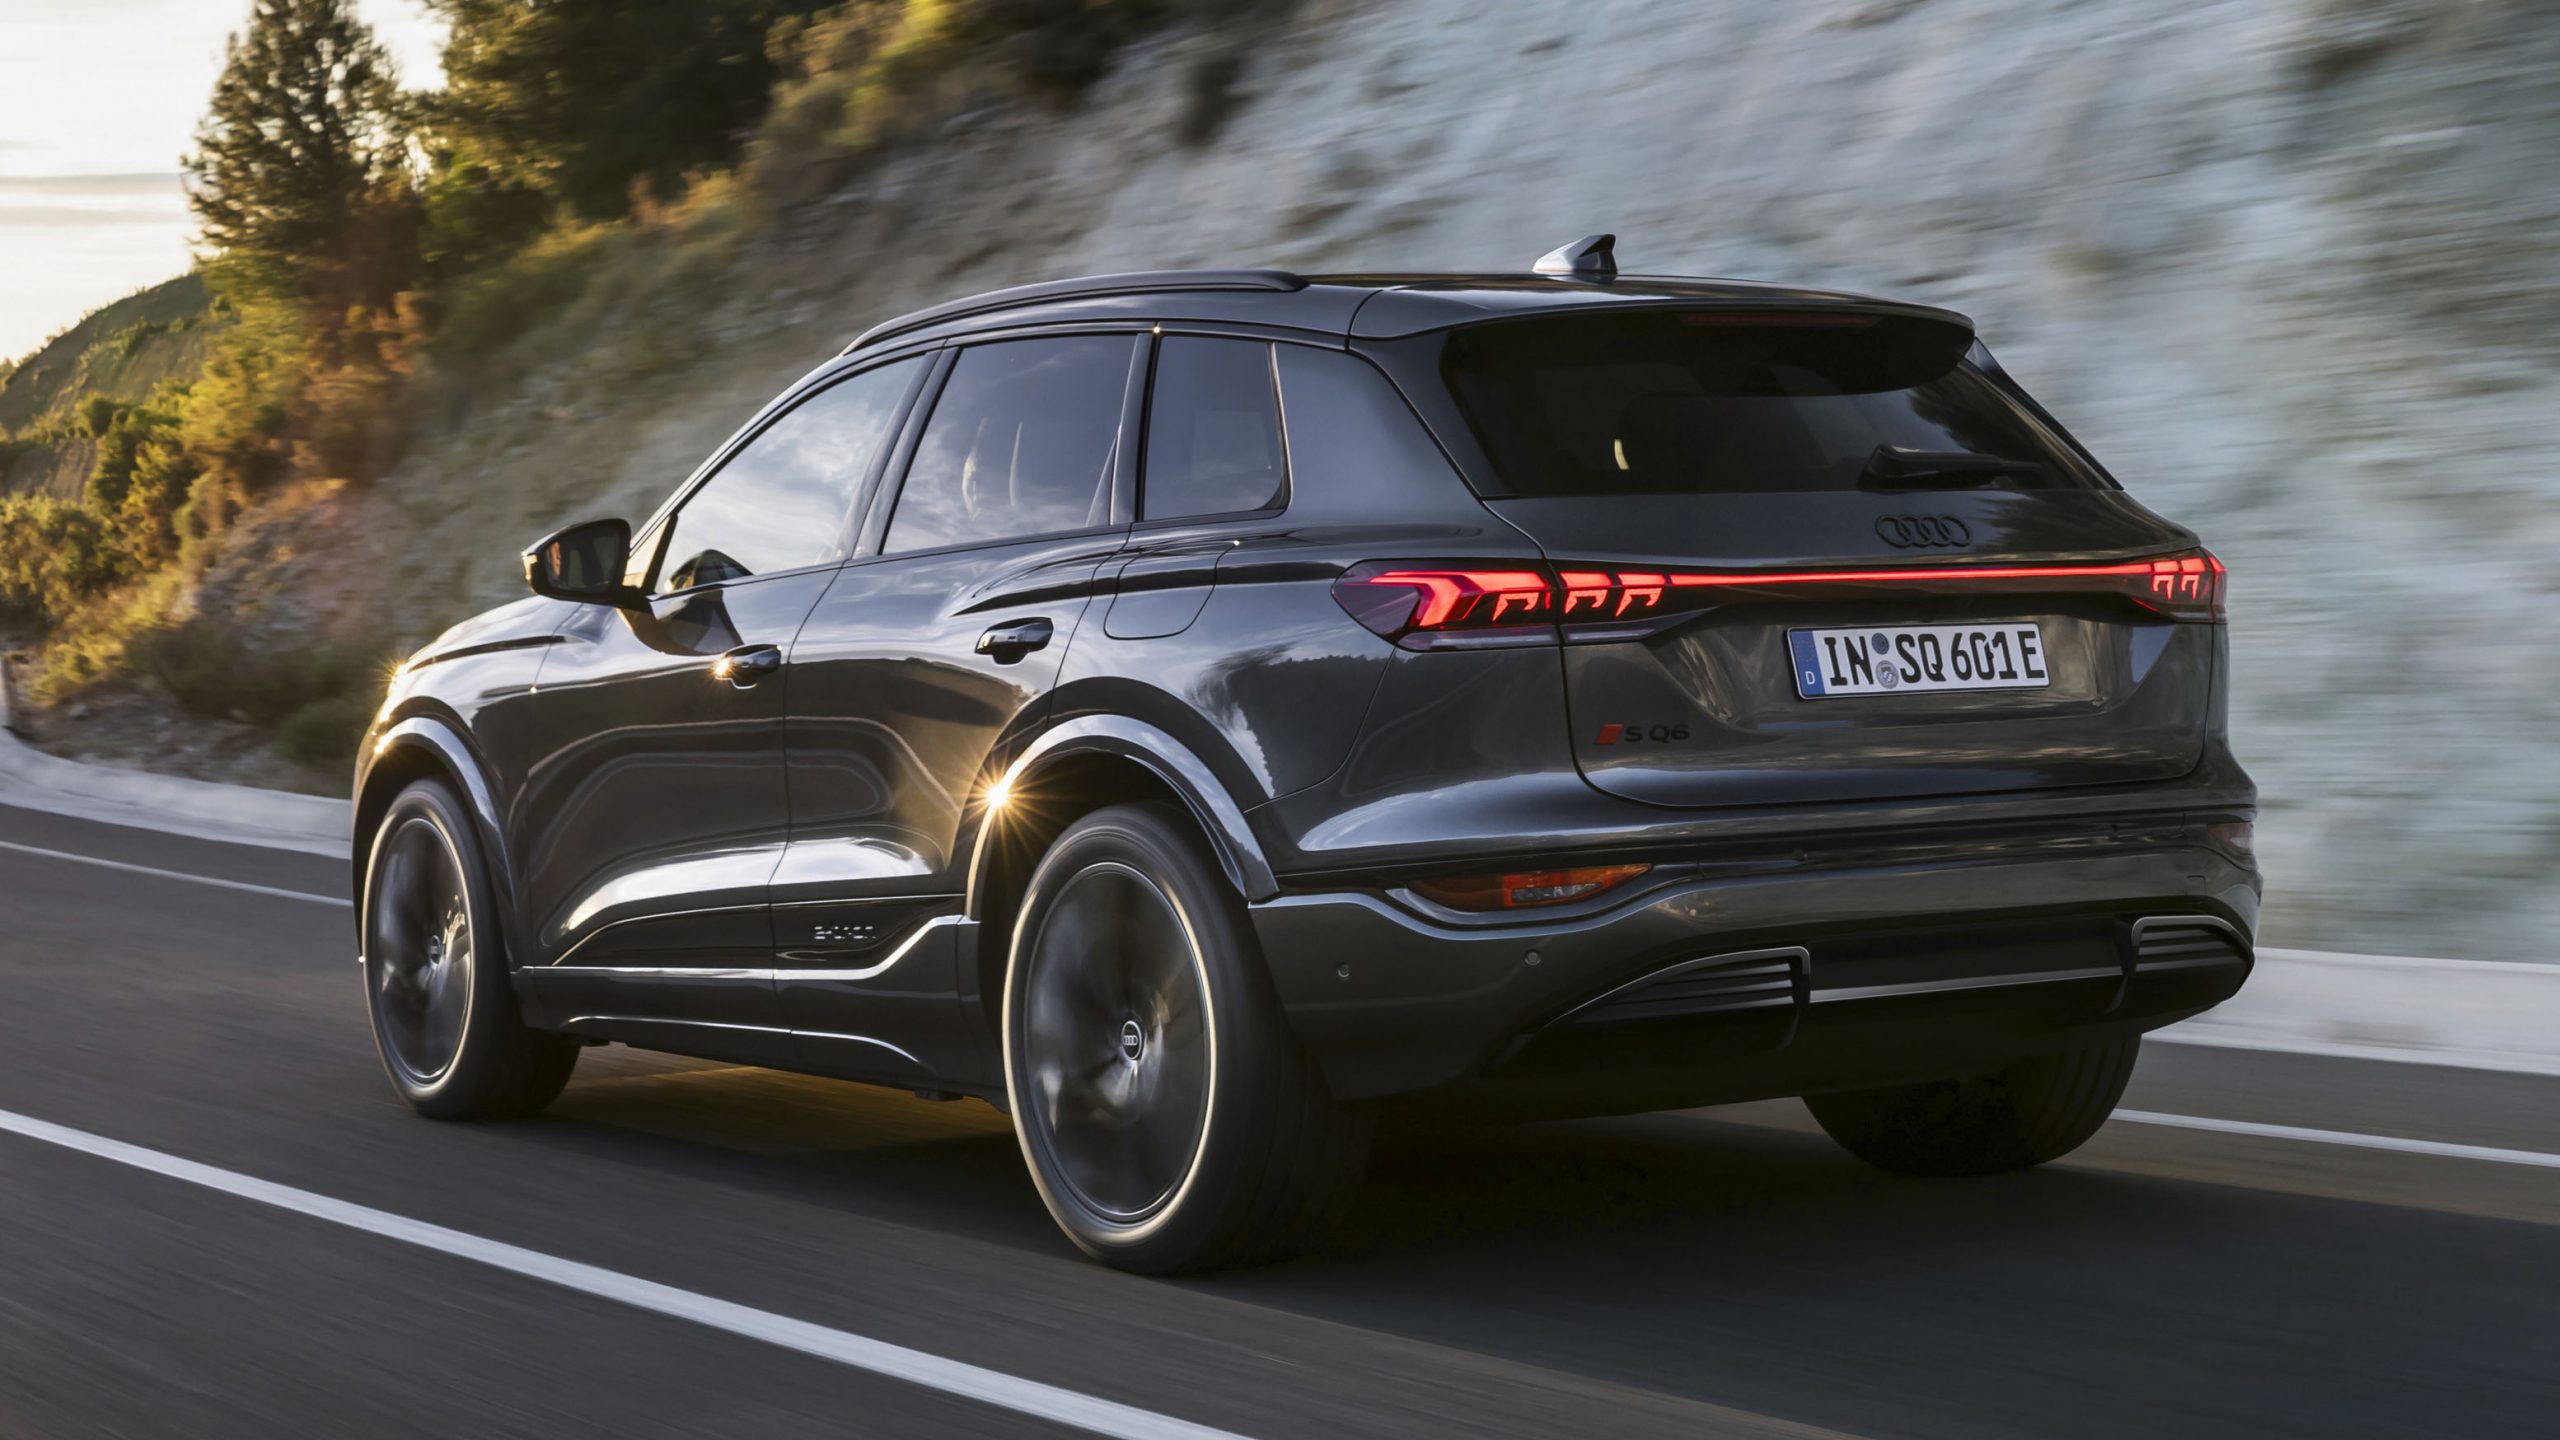 Audi Reveals Performance Model of Q6 E-tron with Exceptional Range